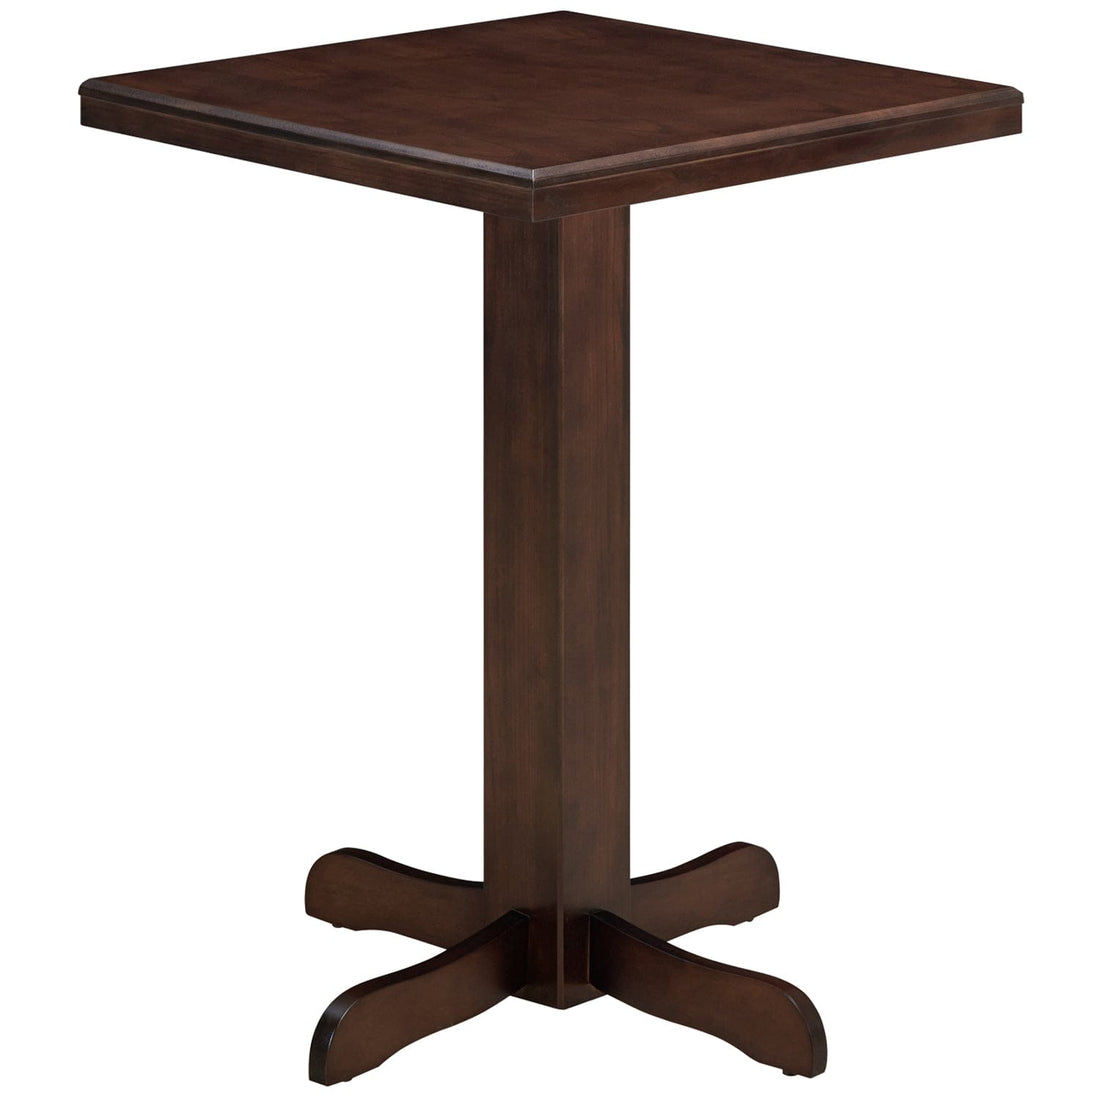 RAM Game Room Chestnut Square Pub Table - Atomic Game Store